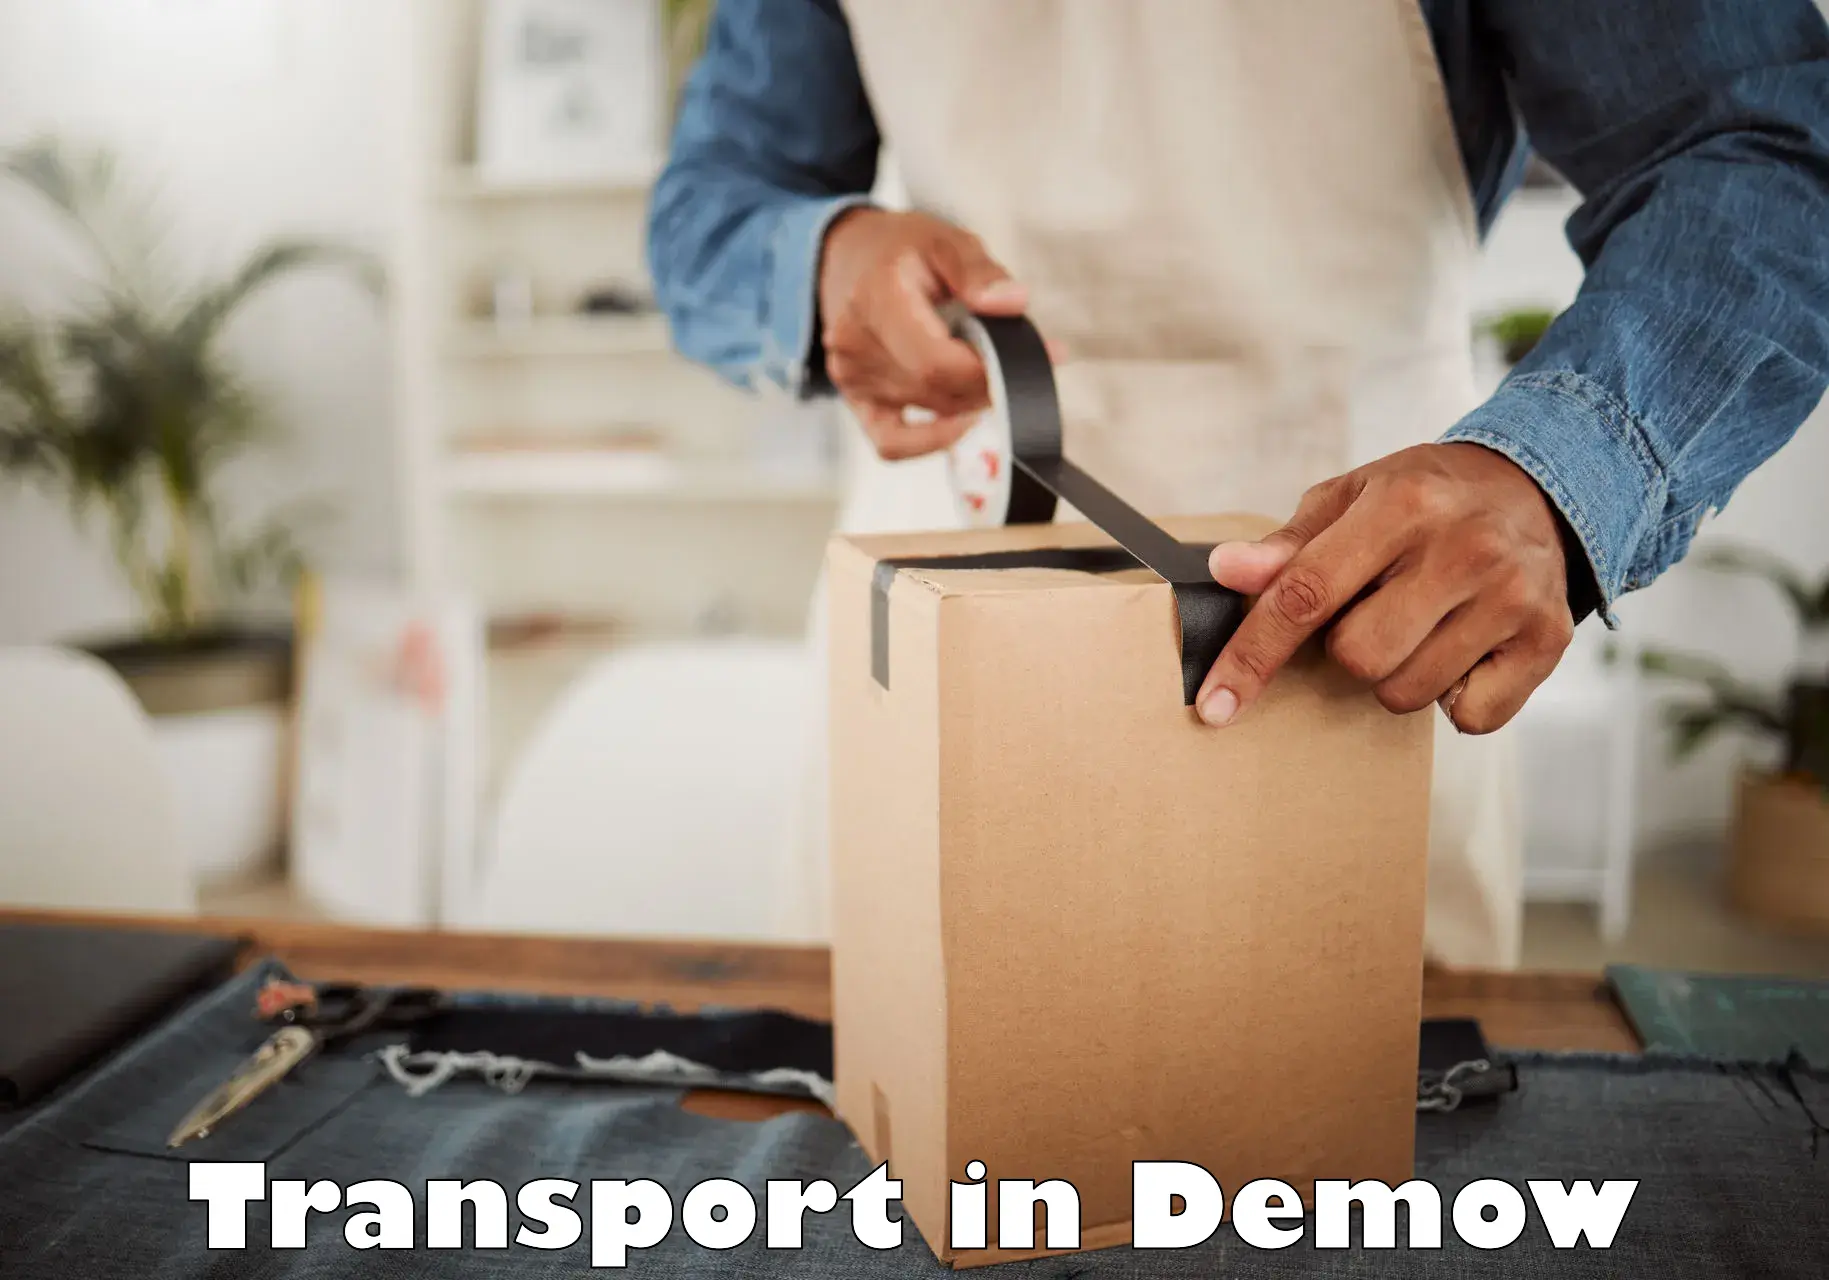 Parcel transport services in Demow